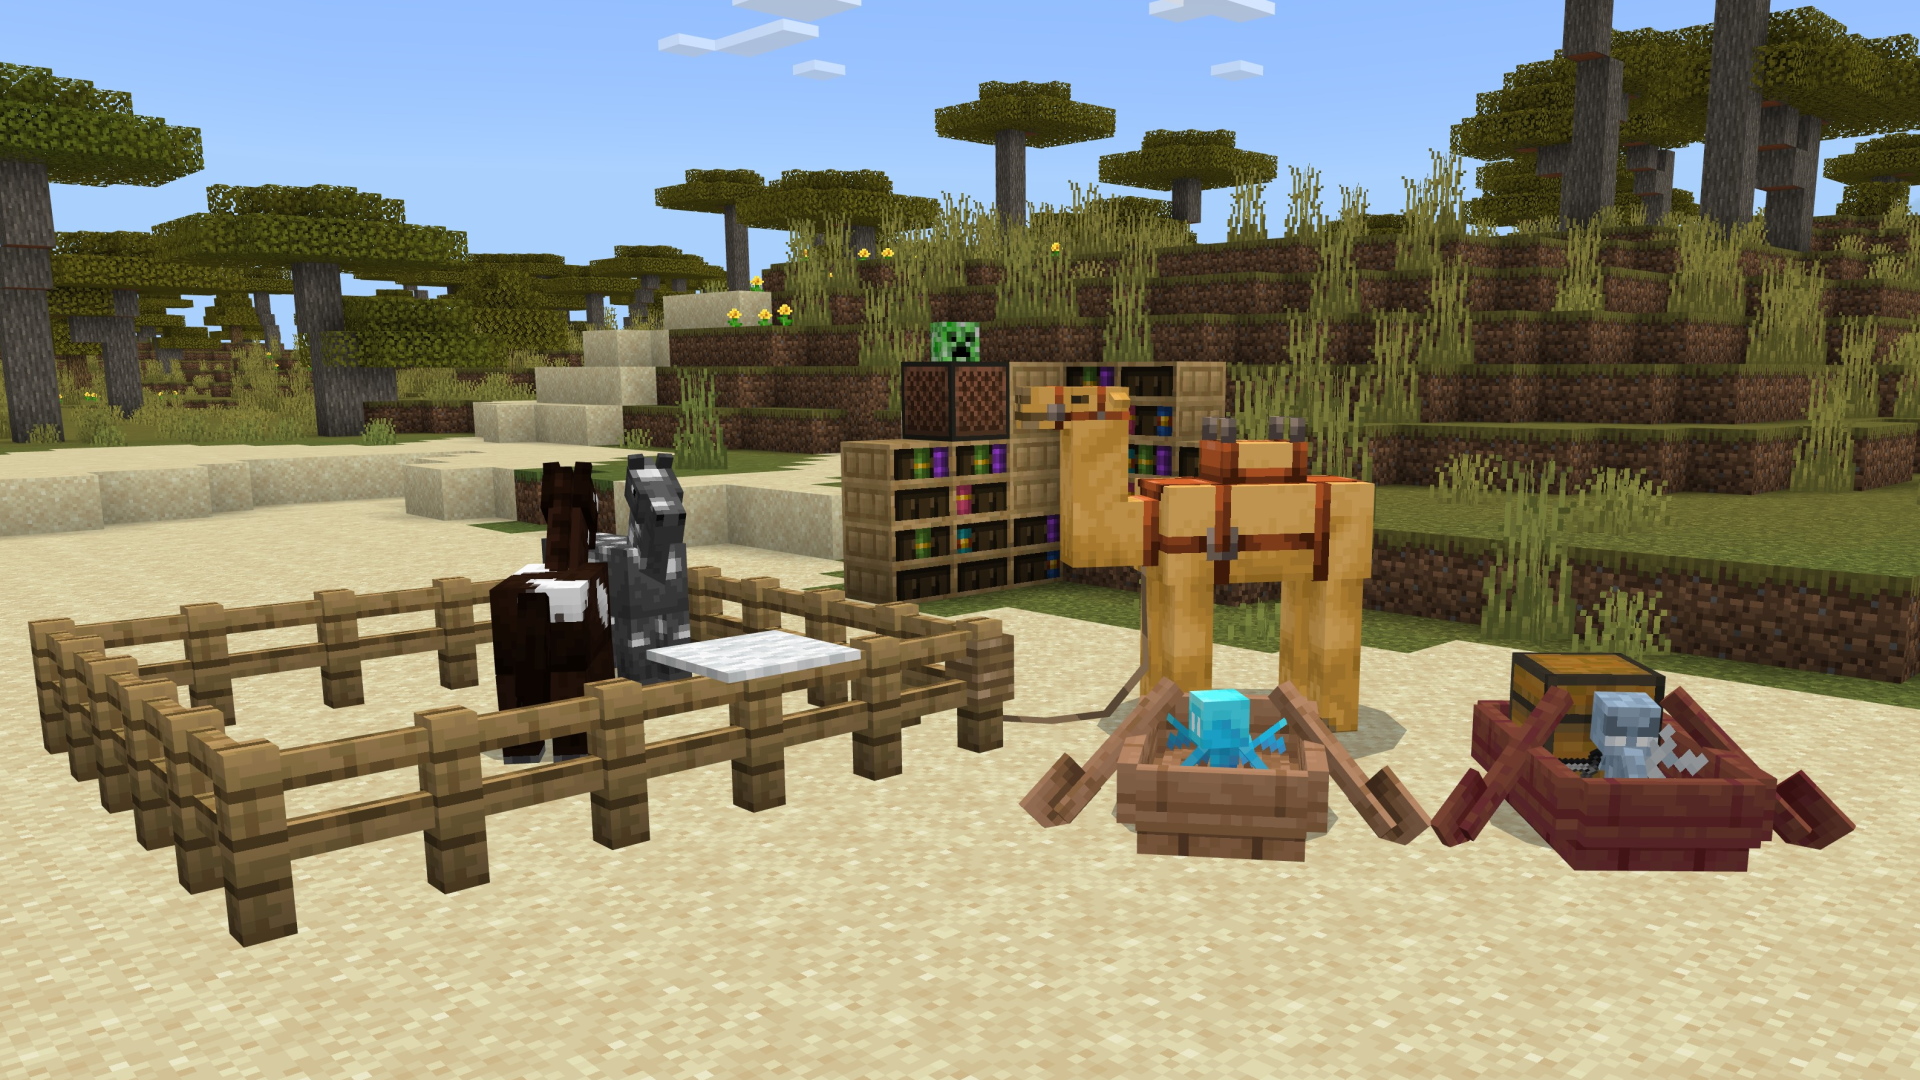 A Minecraft screenshot featuring horses in a fenced area, a leashed camel, and a vex and an allay in boats.